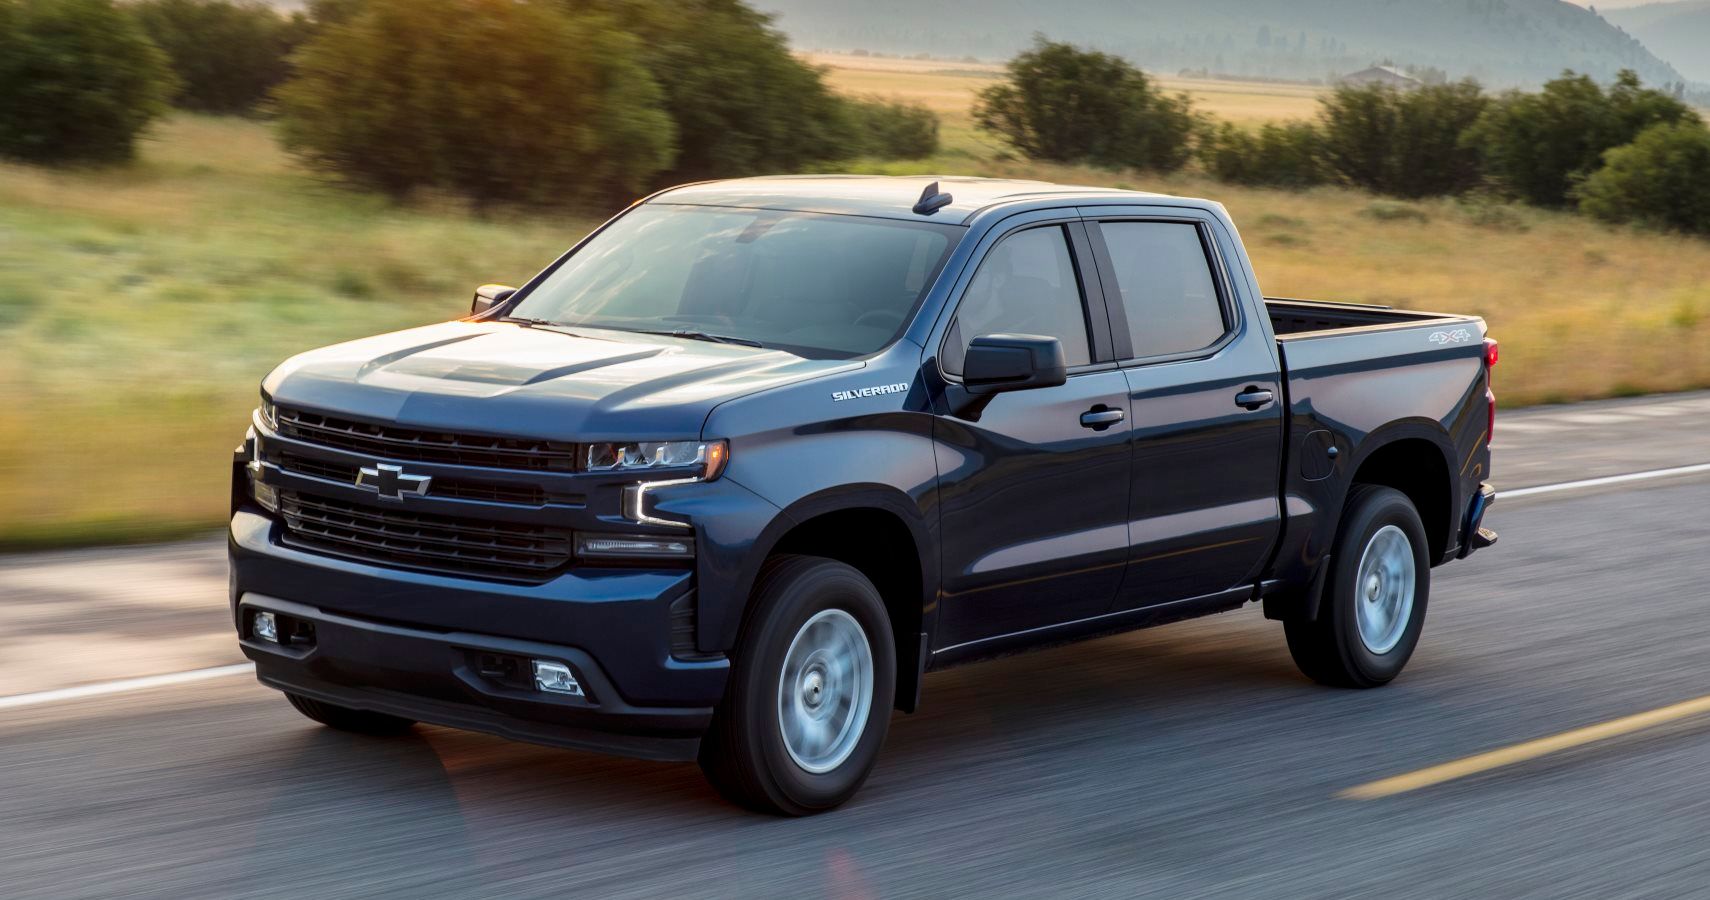 Testing Reveals 4-Cylinder Chevy Silverado Actually Worse Than V8 For